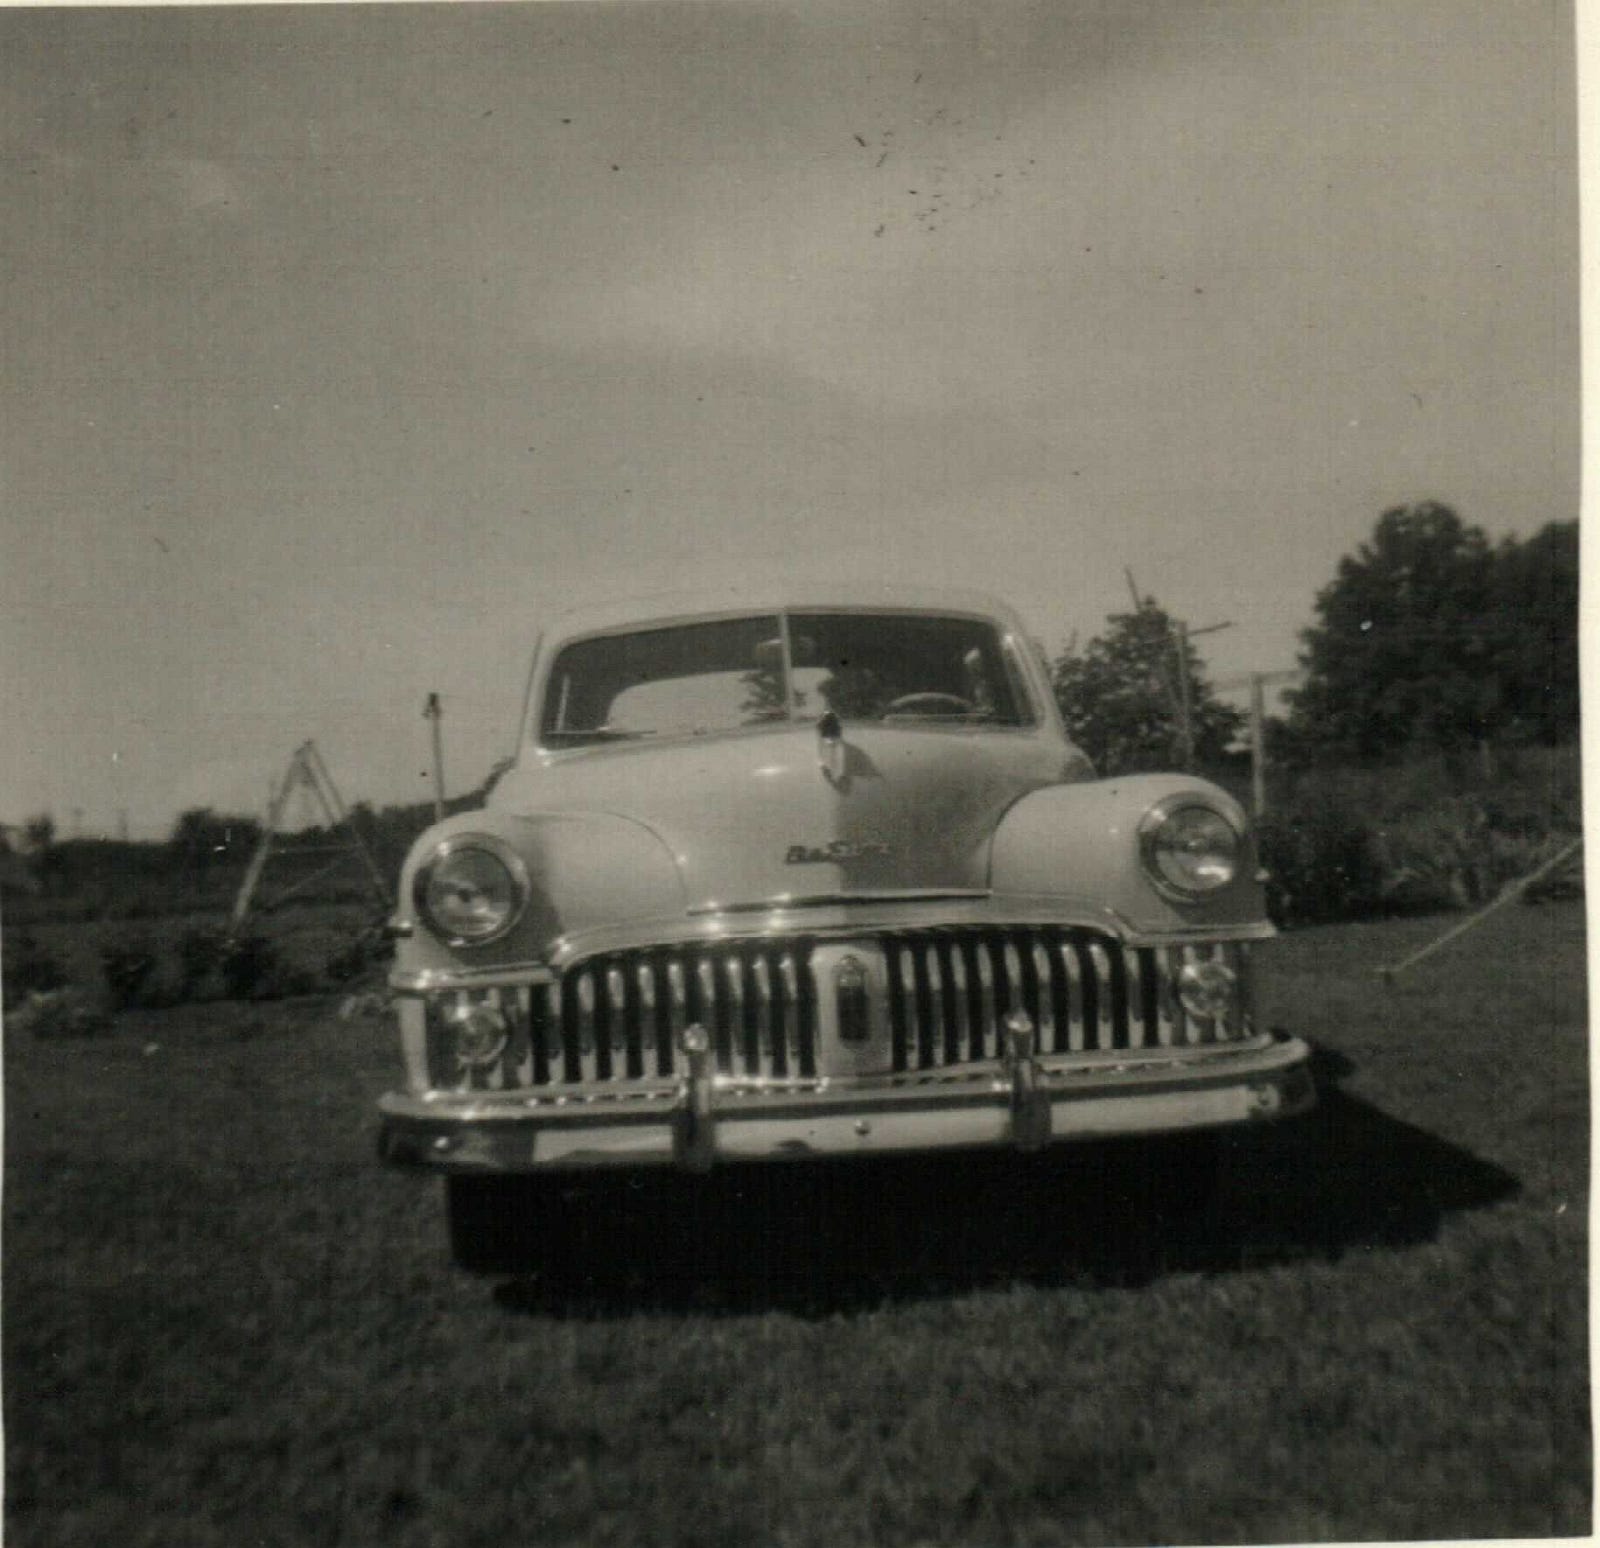 1950 DeSoto owned by my Mother’s Callahan family